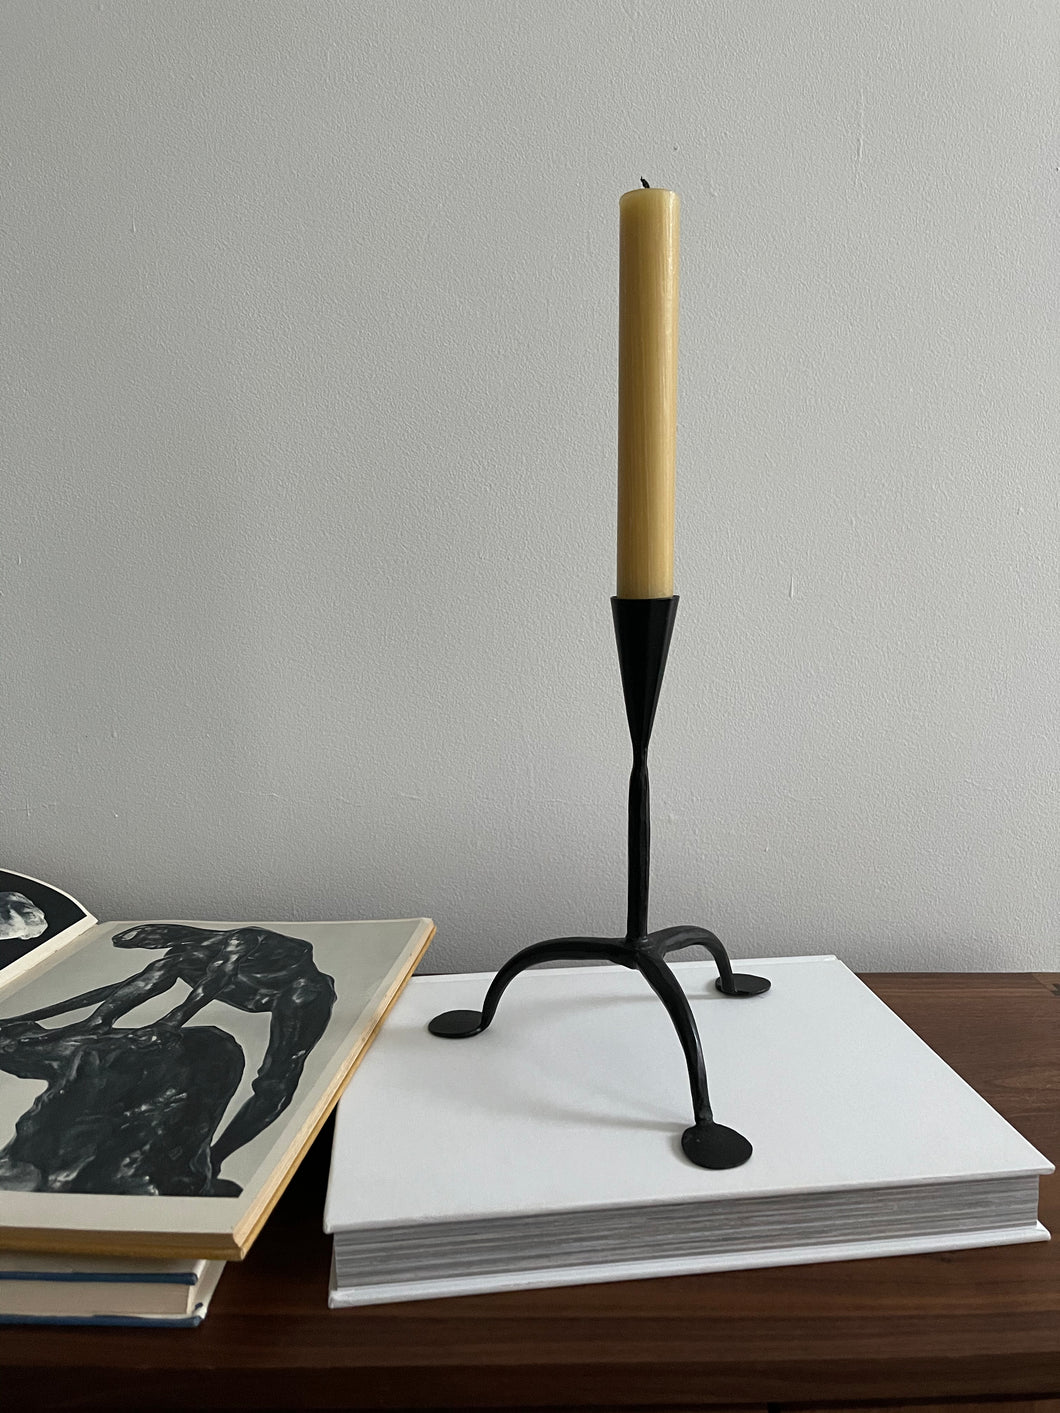 Three Footed Iron Candle Holder